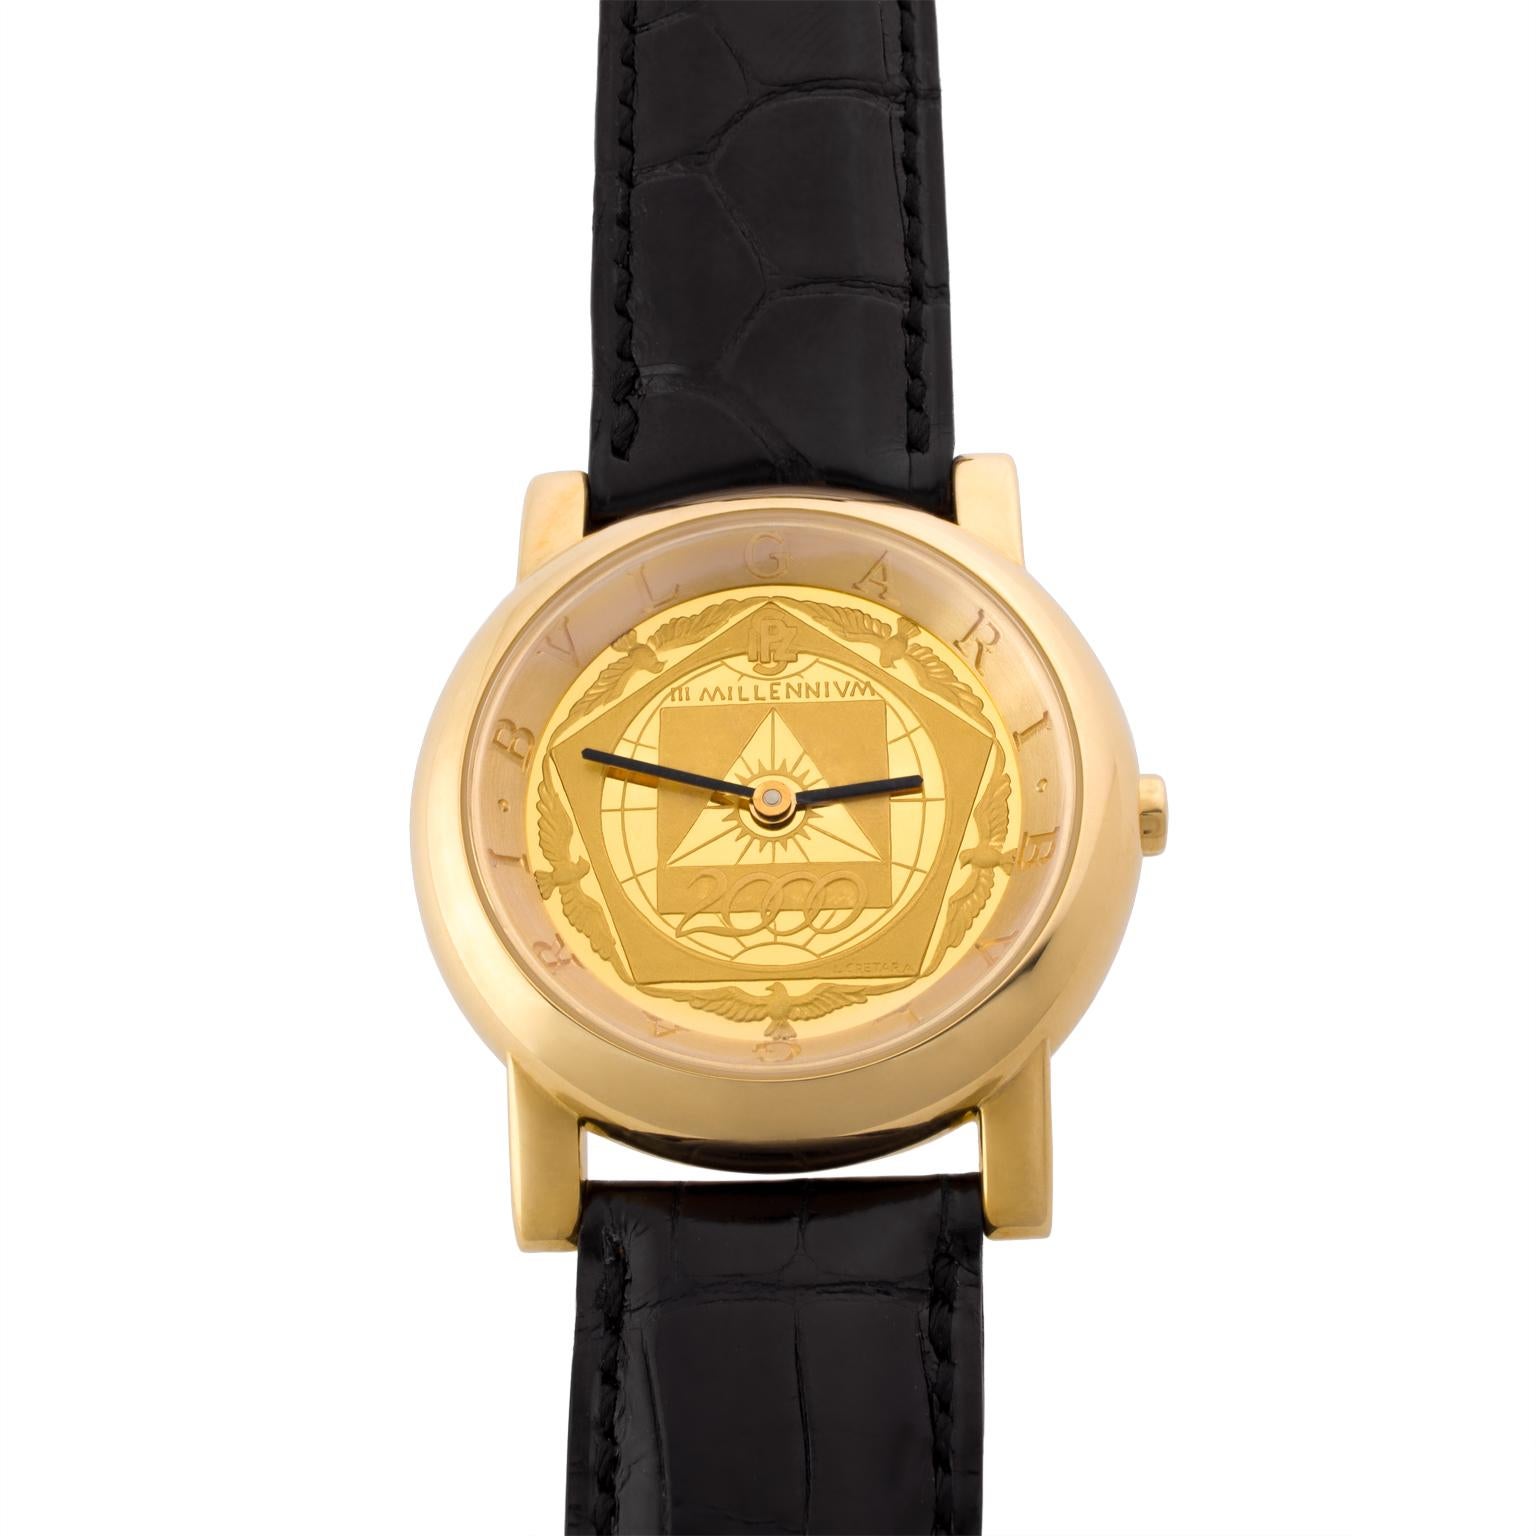 Bulgari automatic wristwatch in 18 karat gold, Anfiteatro III Millenium model, limited edition with serial number 0571. Gold round case decorated with geometrical and bird motifs with black hands. Original gold buckle and black alligator